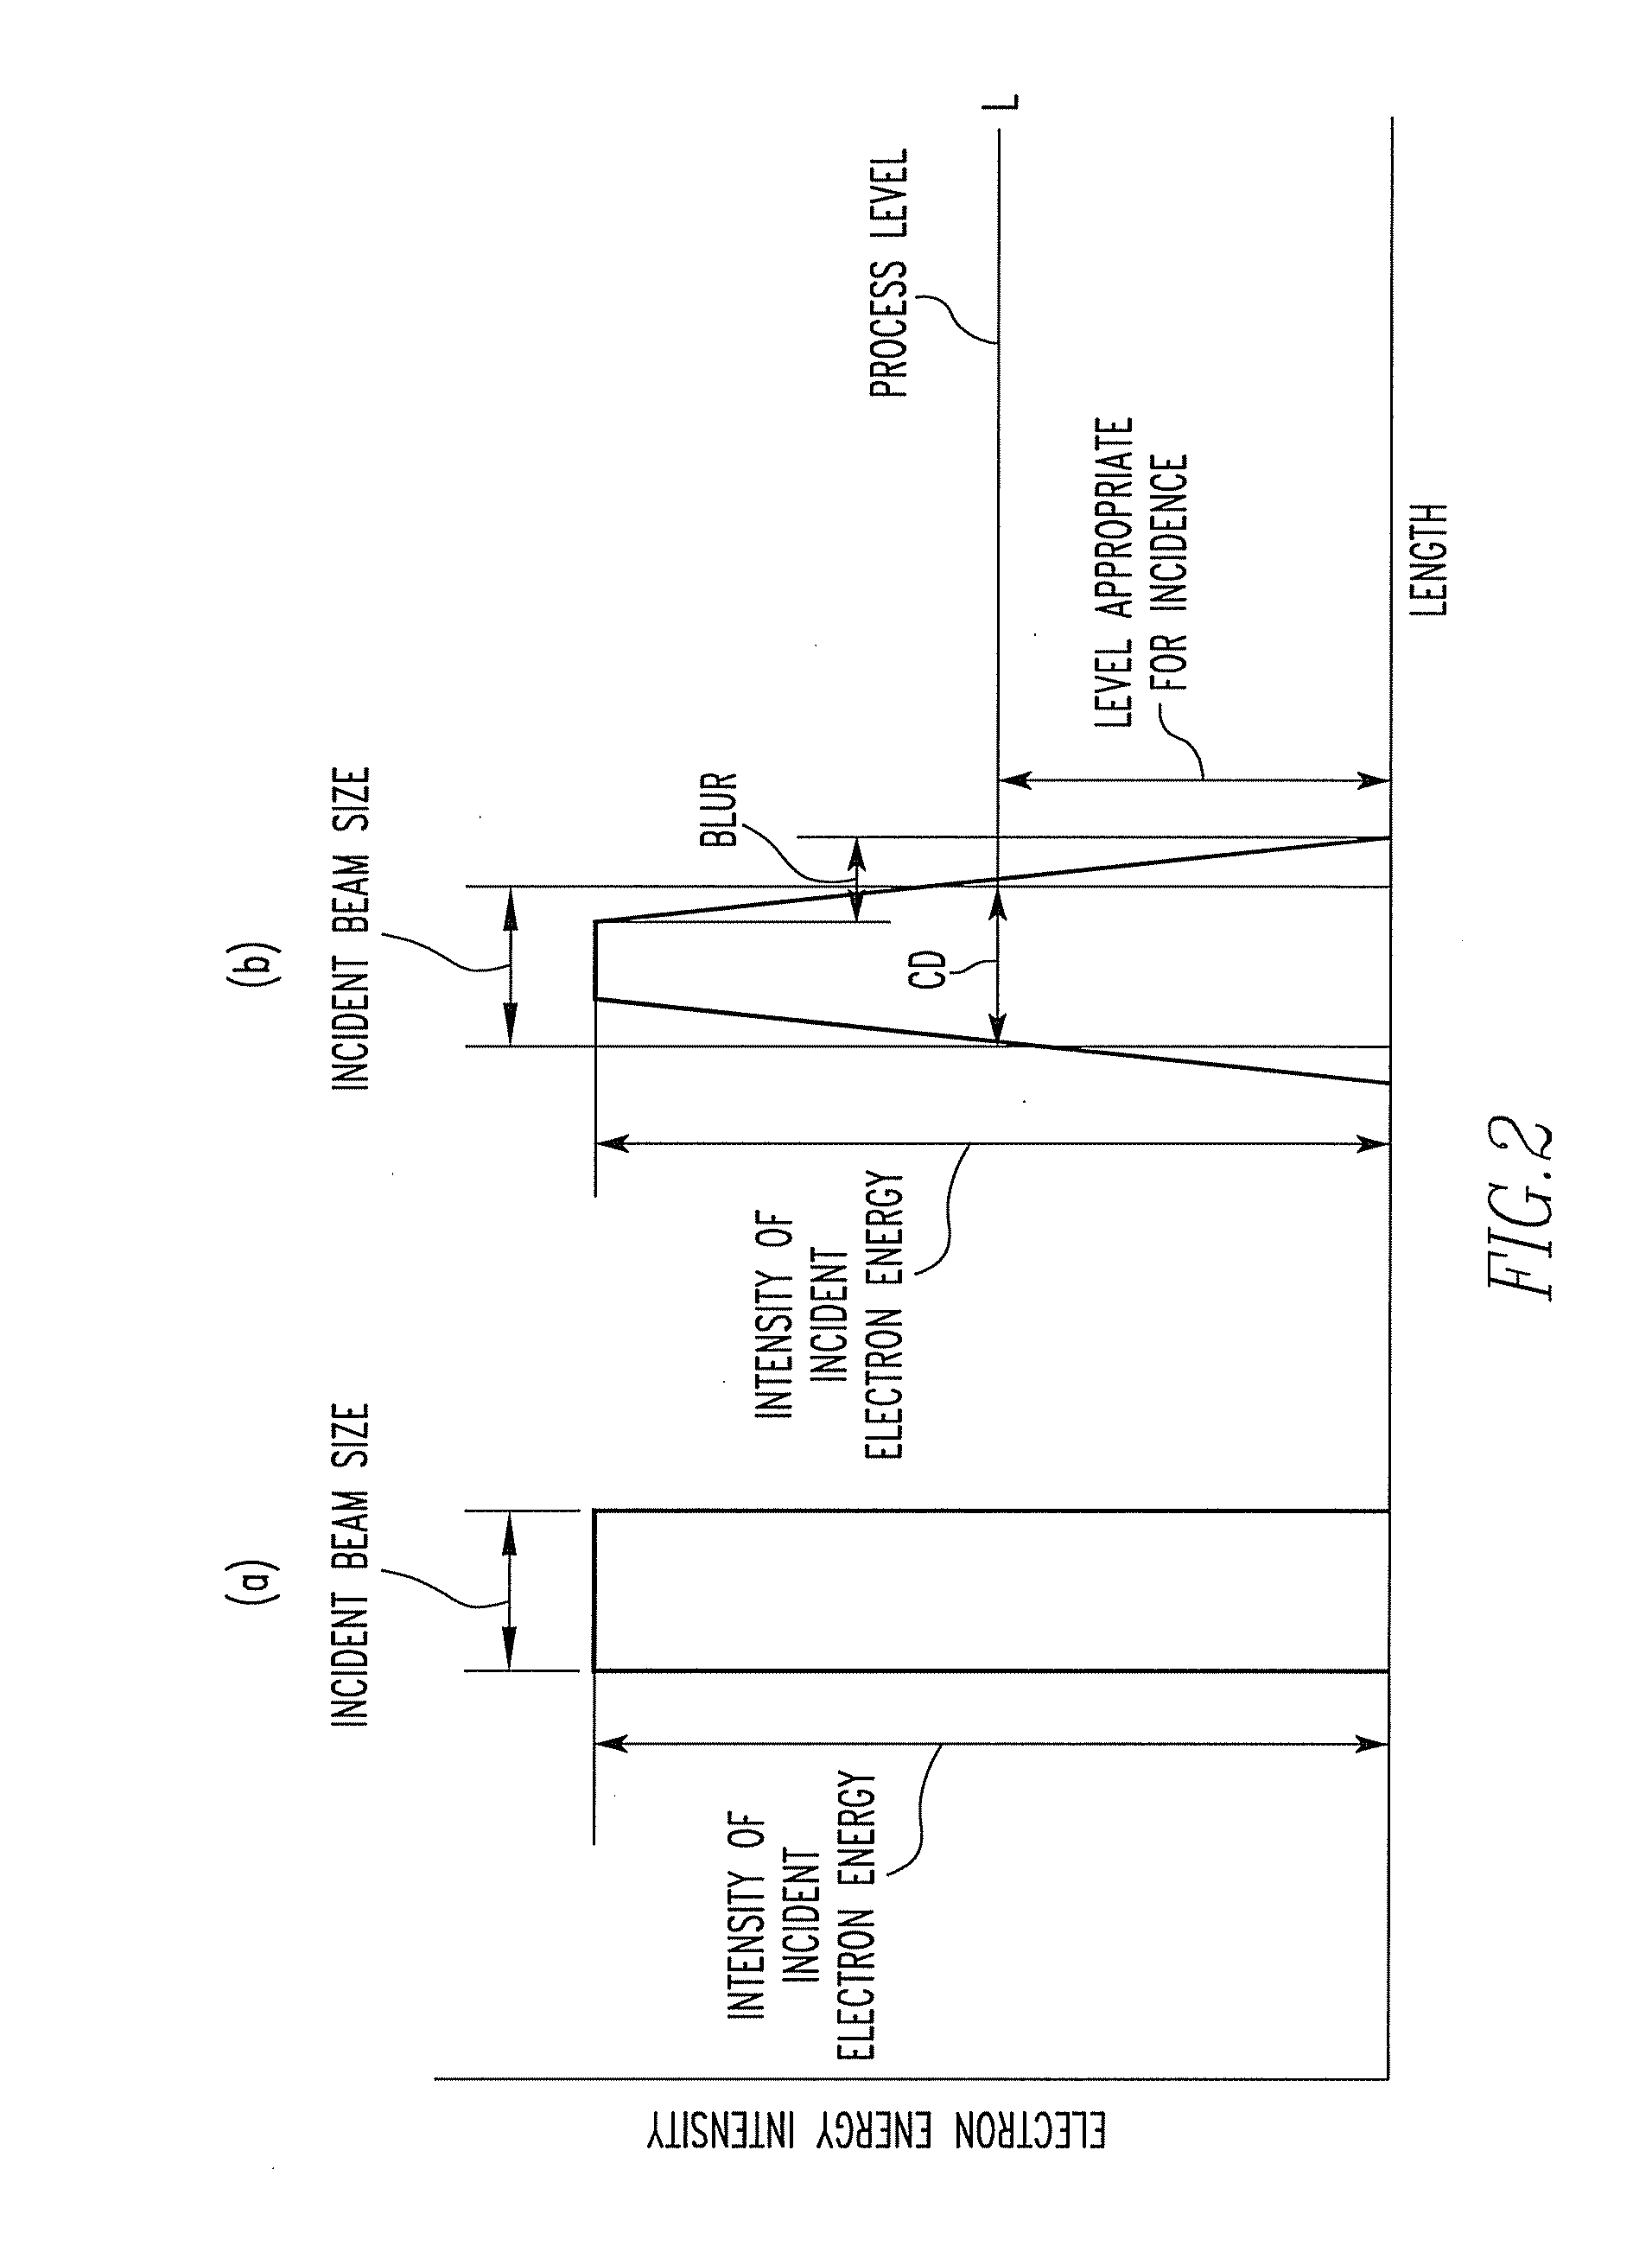 Method and System for Charged-Particle Beam Lithography